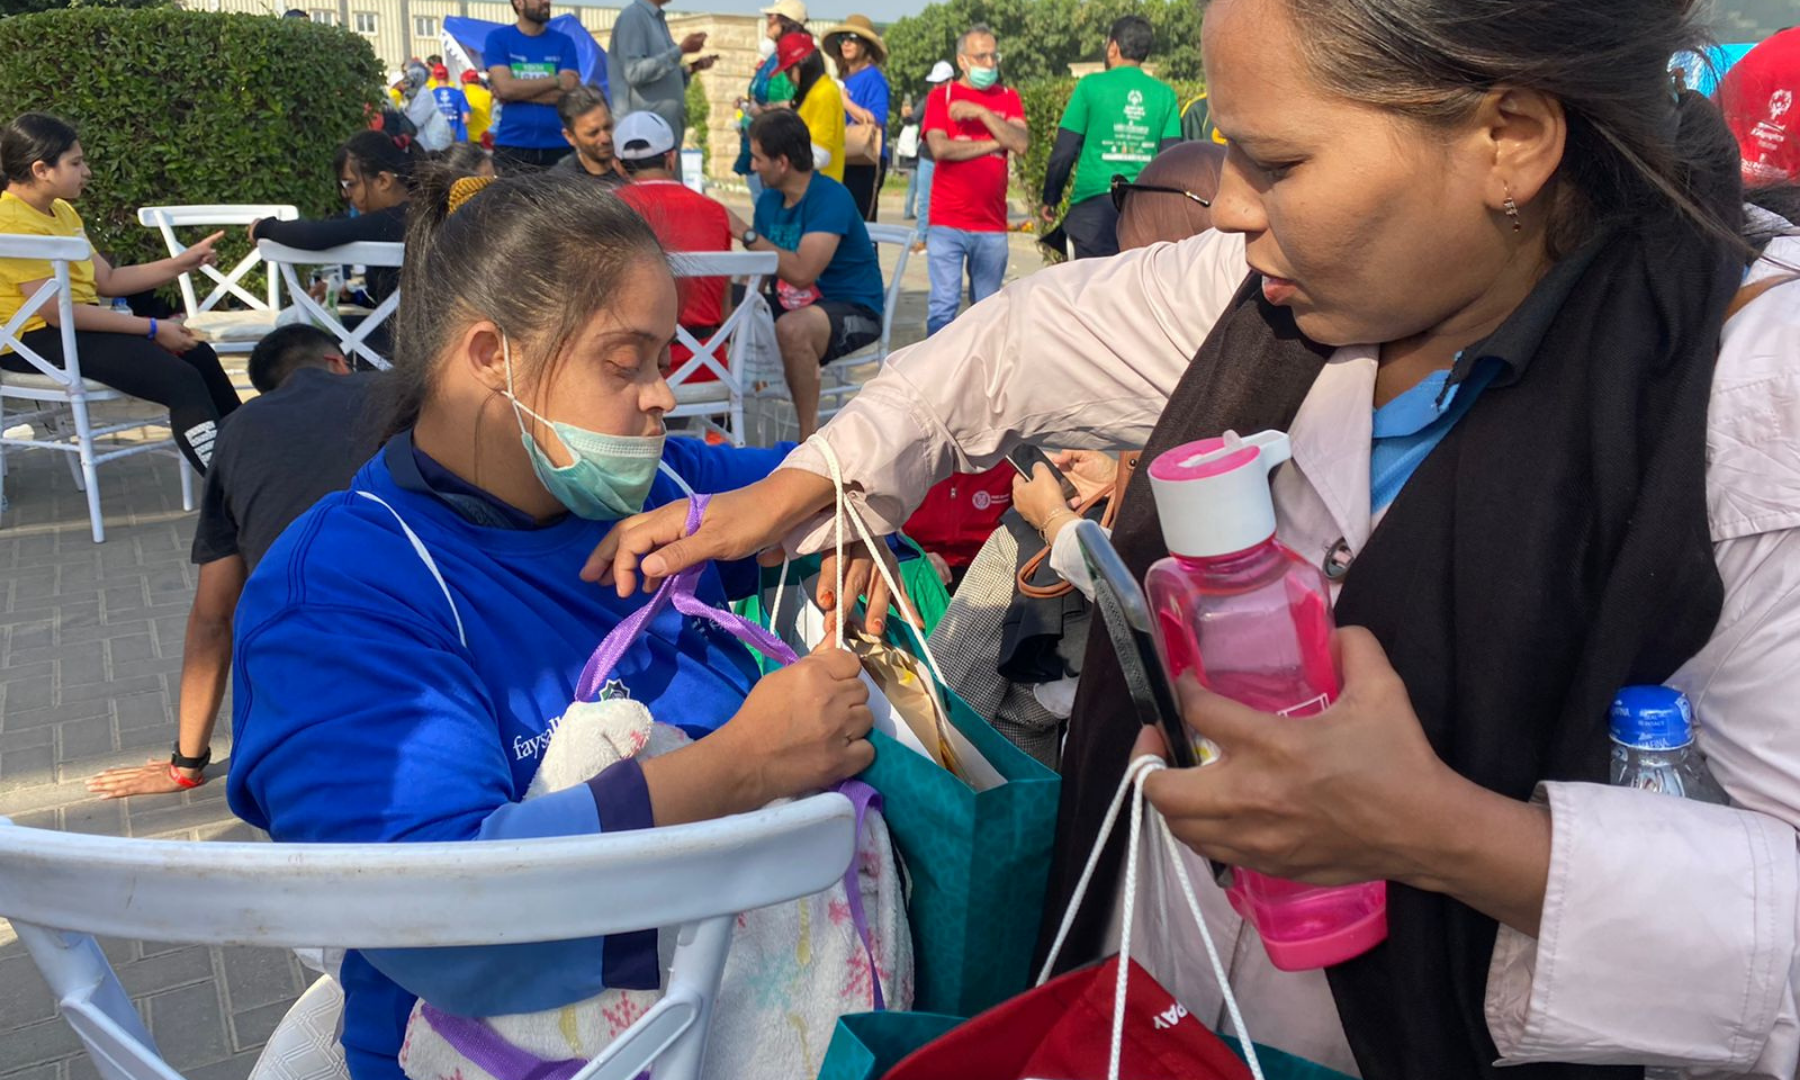 A mother lends a helping hand to her daughter who is seen resting after participating in the 1km Unified Marathon.